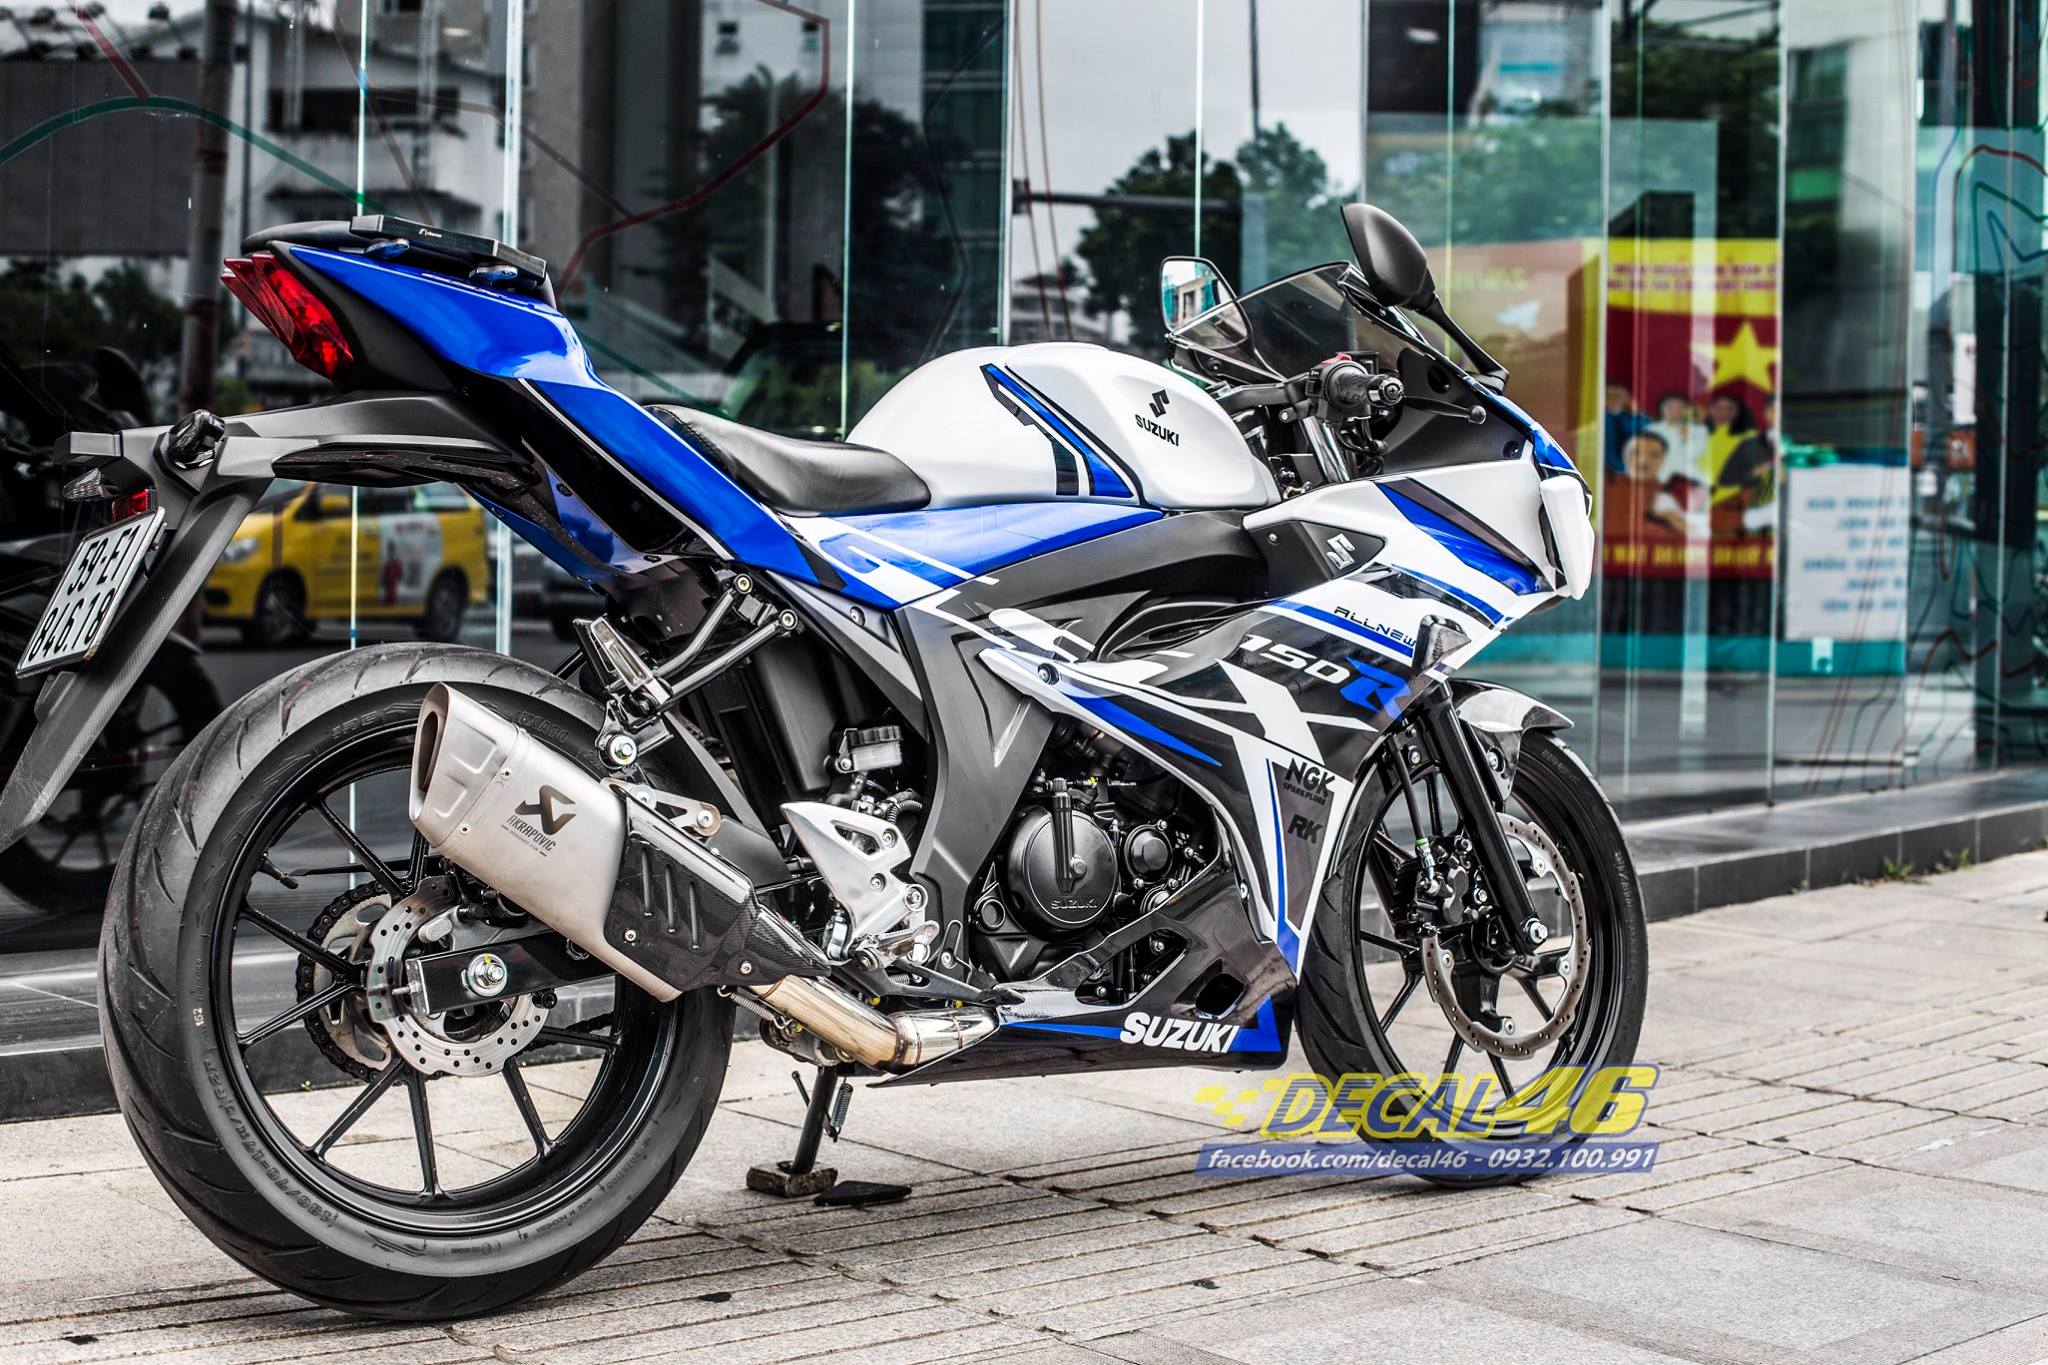 This Suzuki R150 is Equipped with an Akrapovic Exhaust and a Face Kit - left